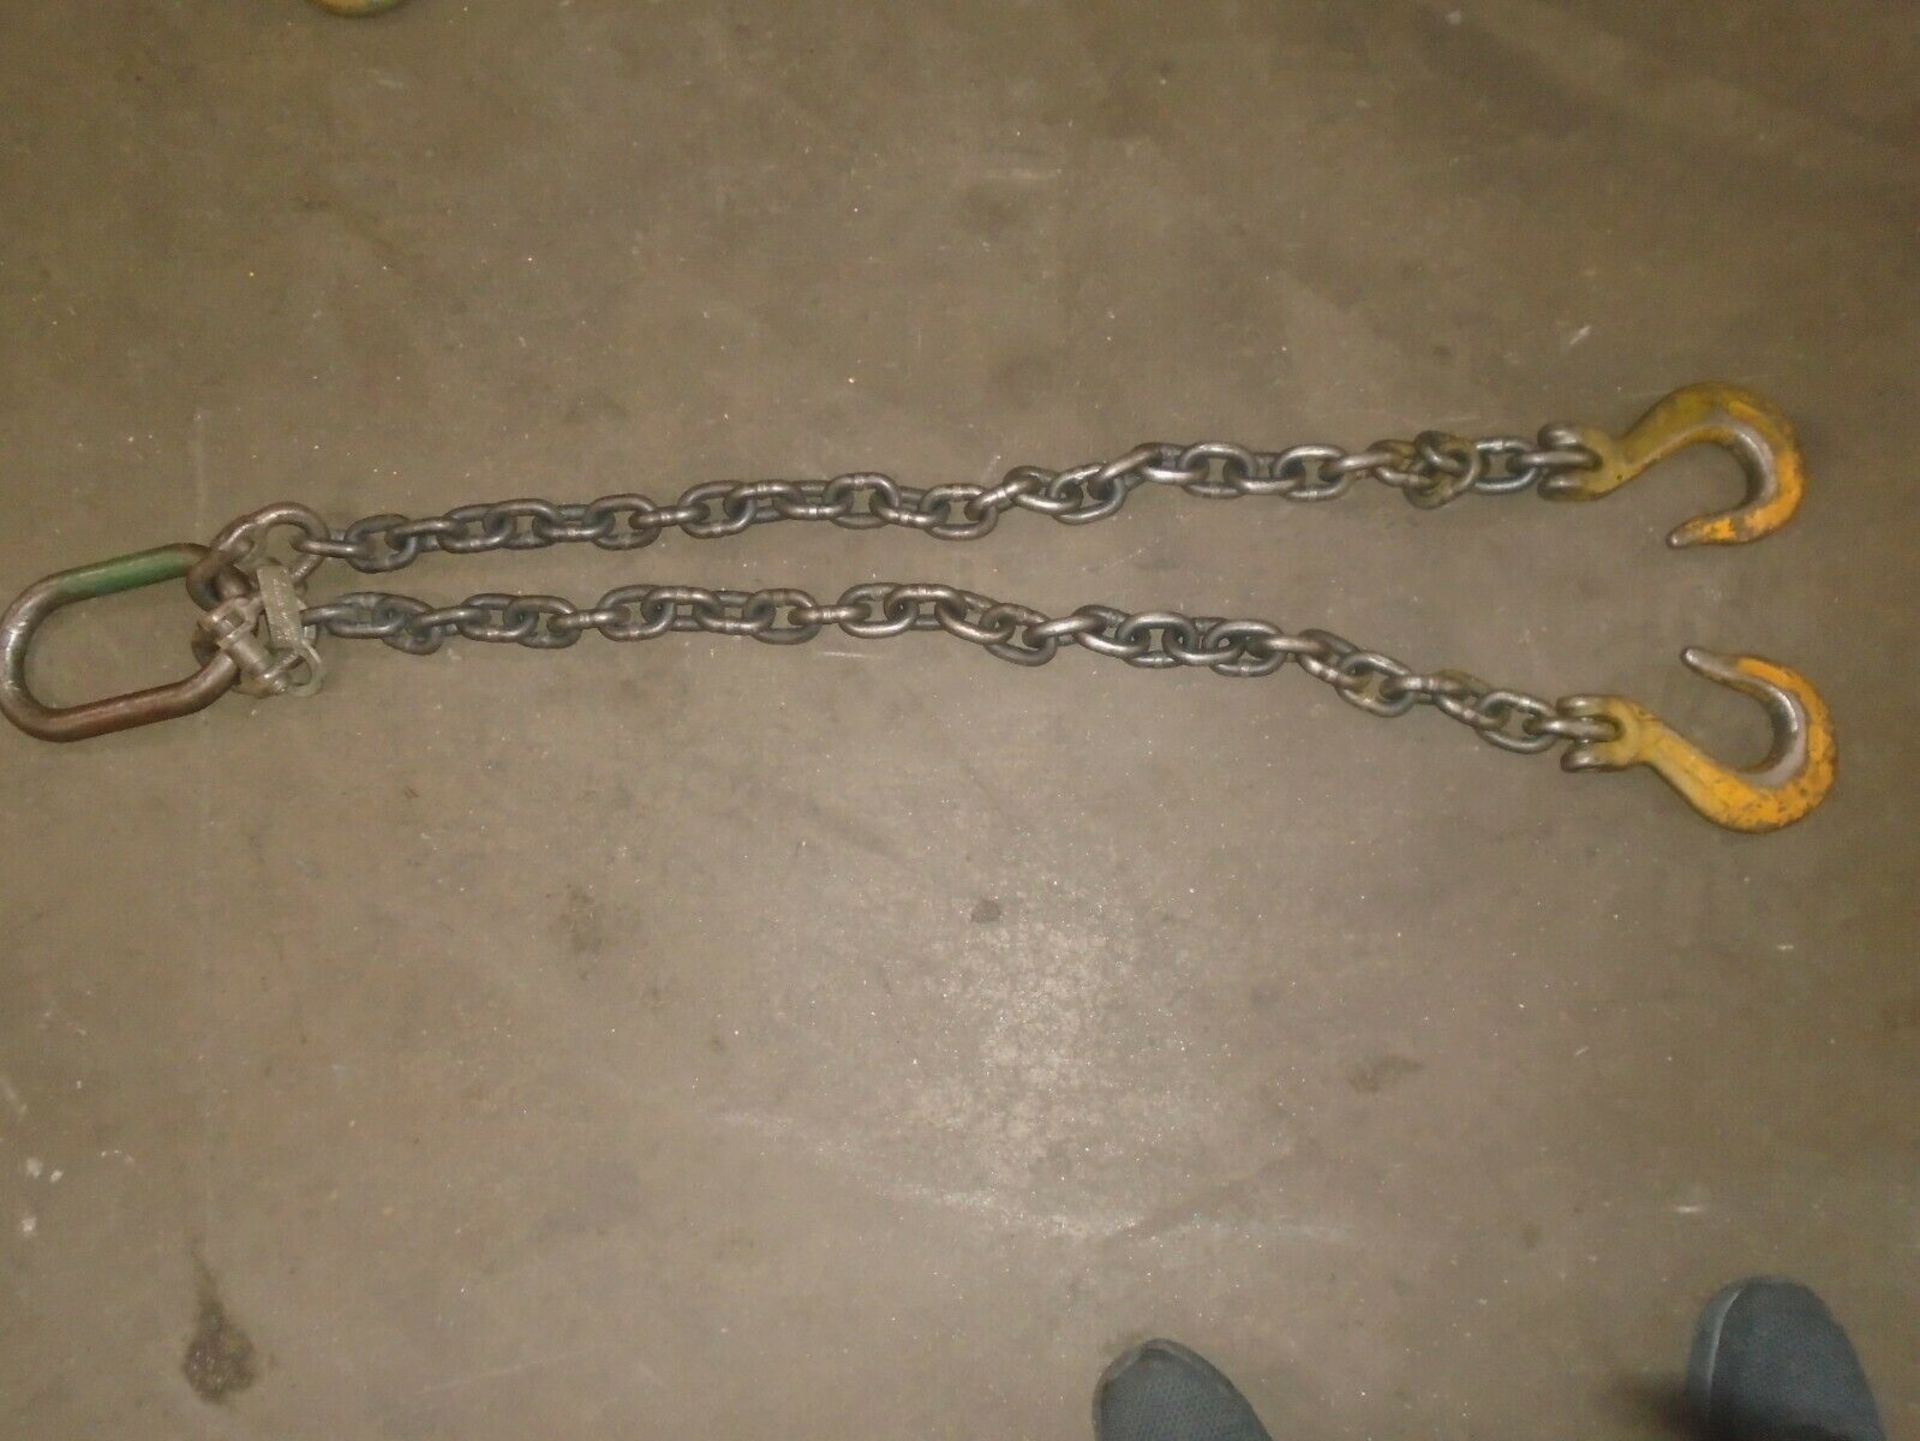 Rigging Chain Double x 5’ Long 20800 Lbs. Capacity